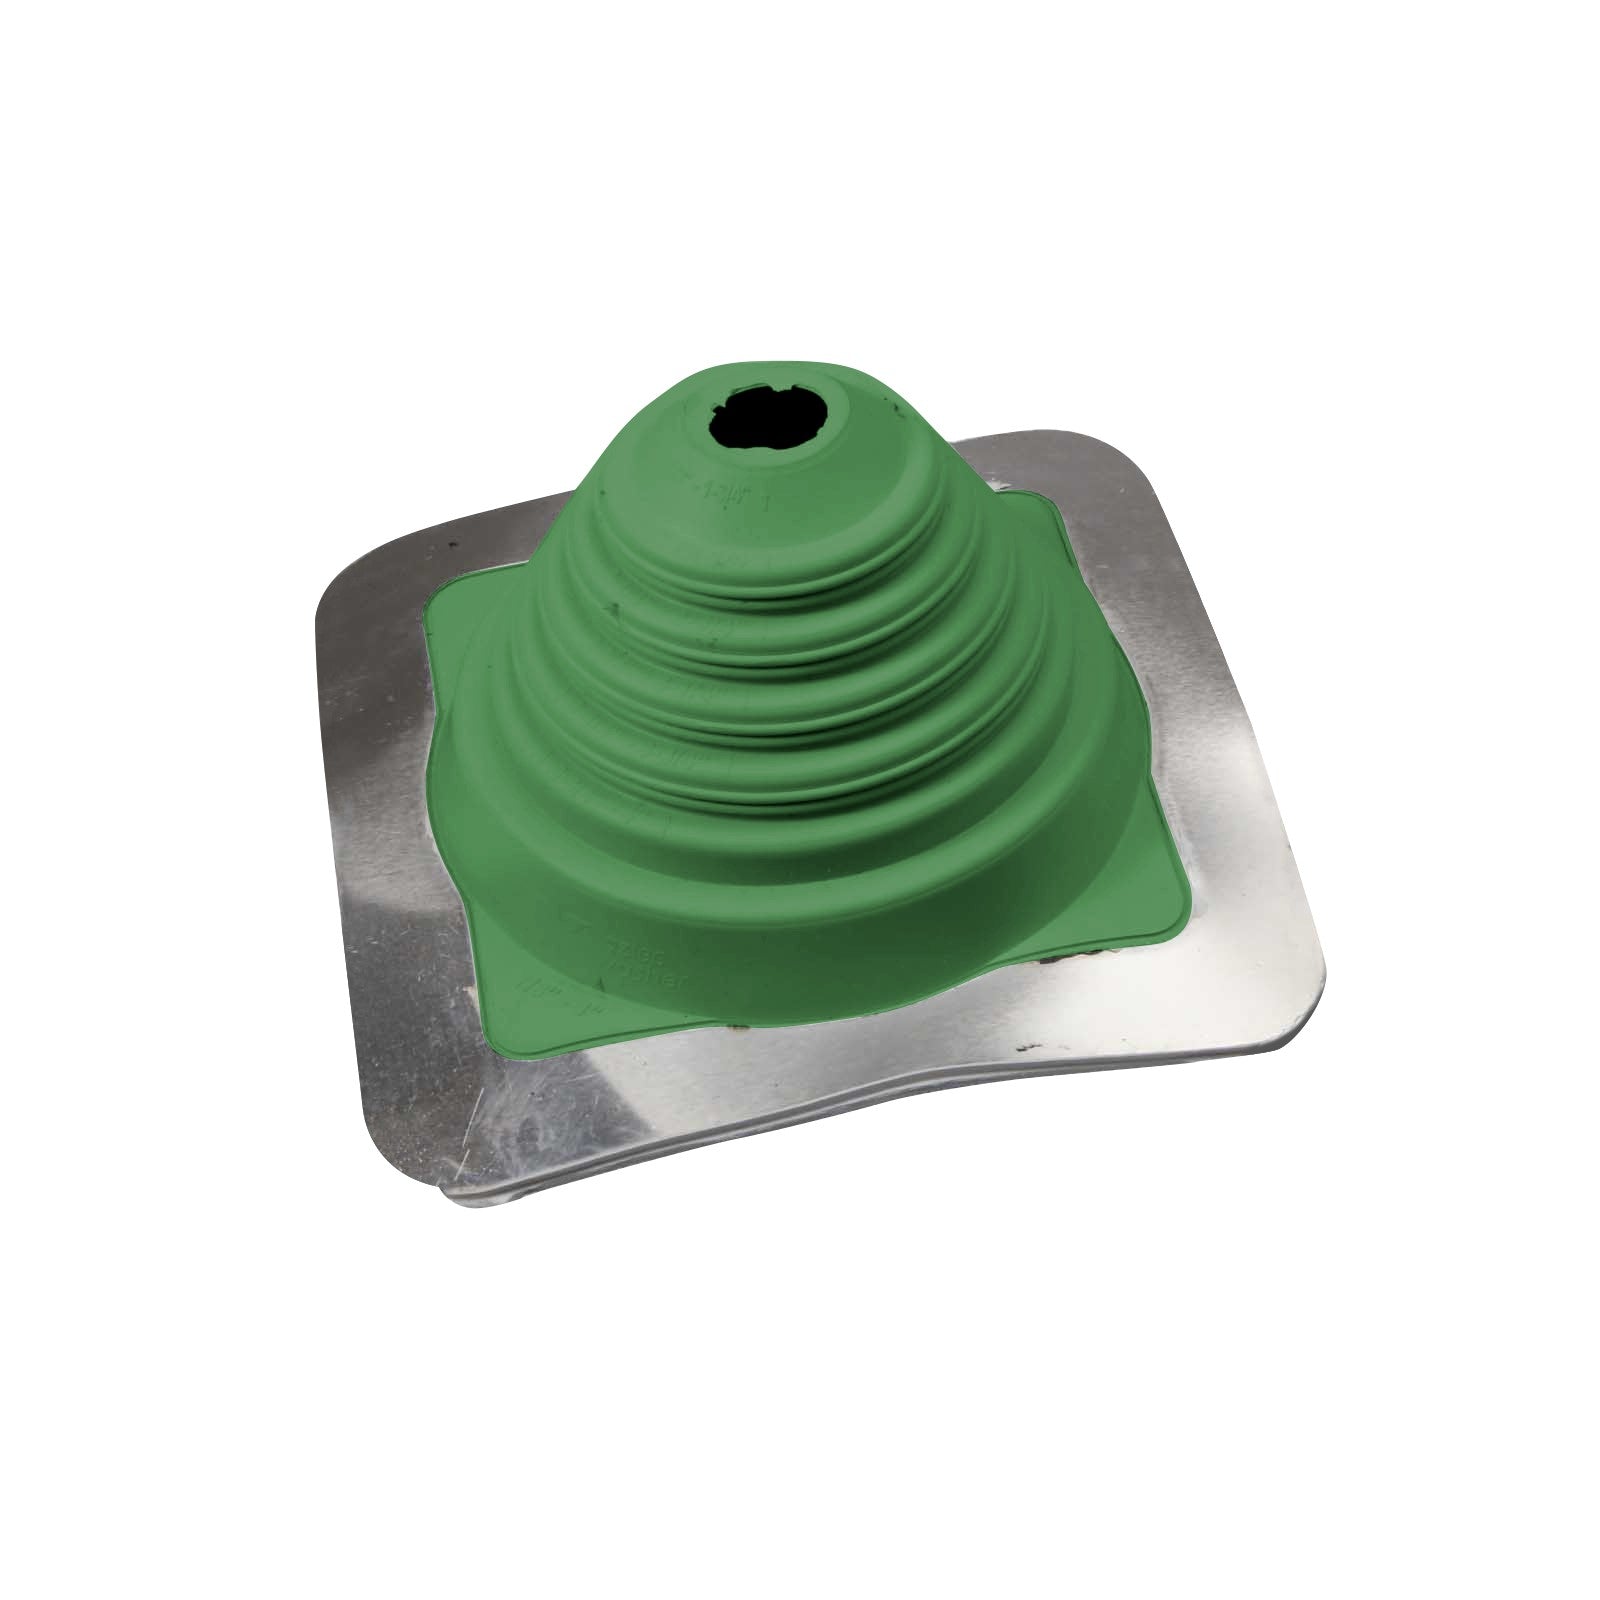 #2 Roofjack Square EPDM Pipe Flashing Boot Light Green